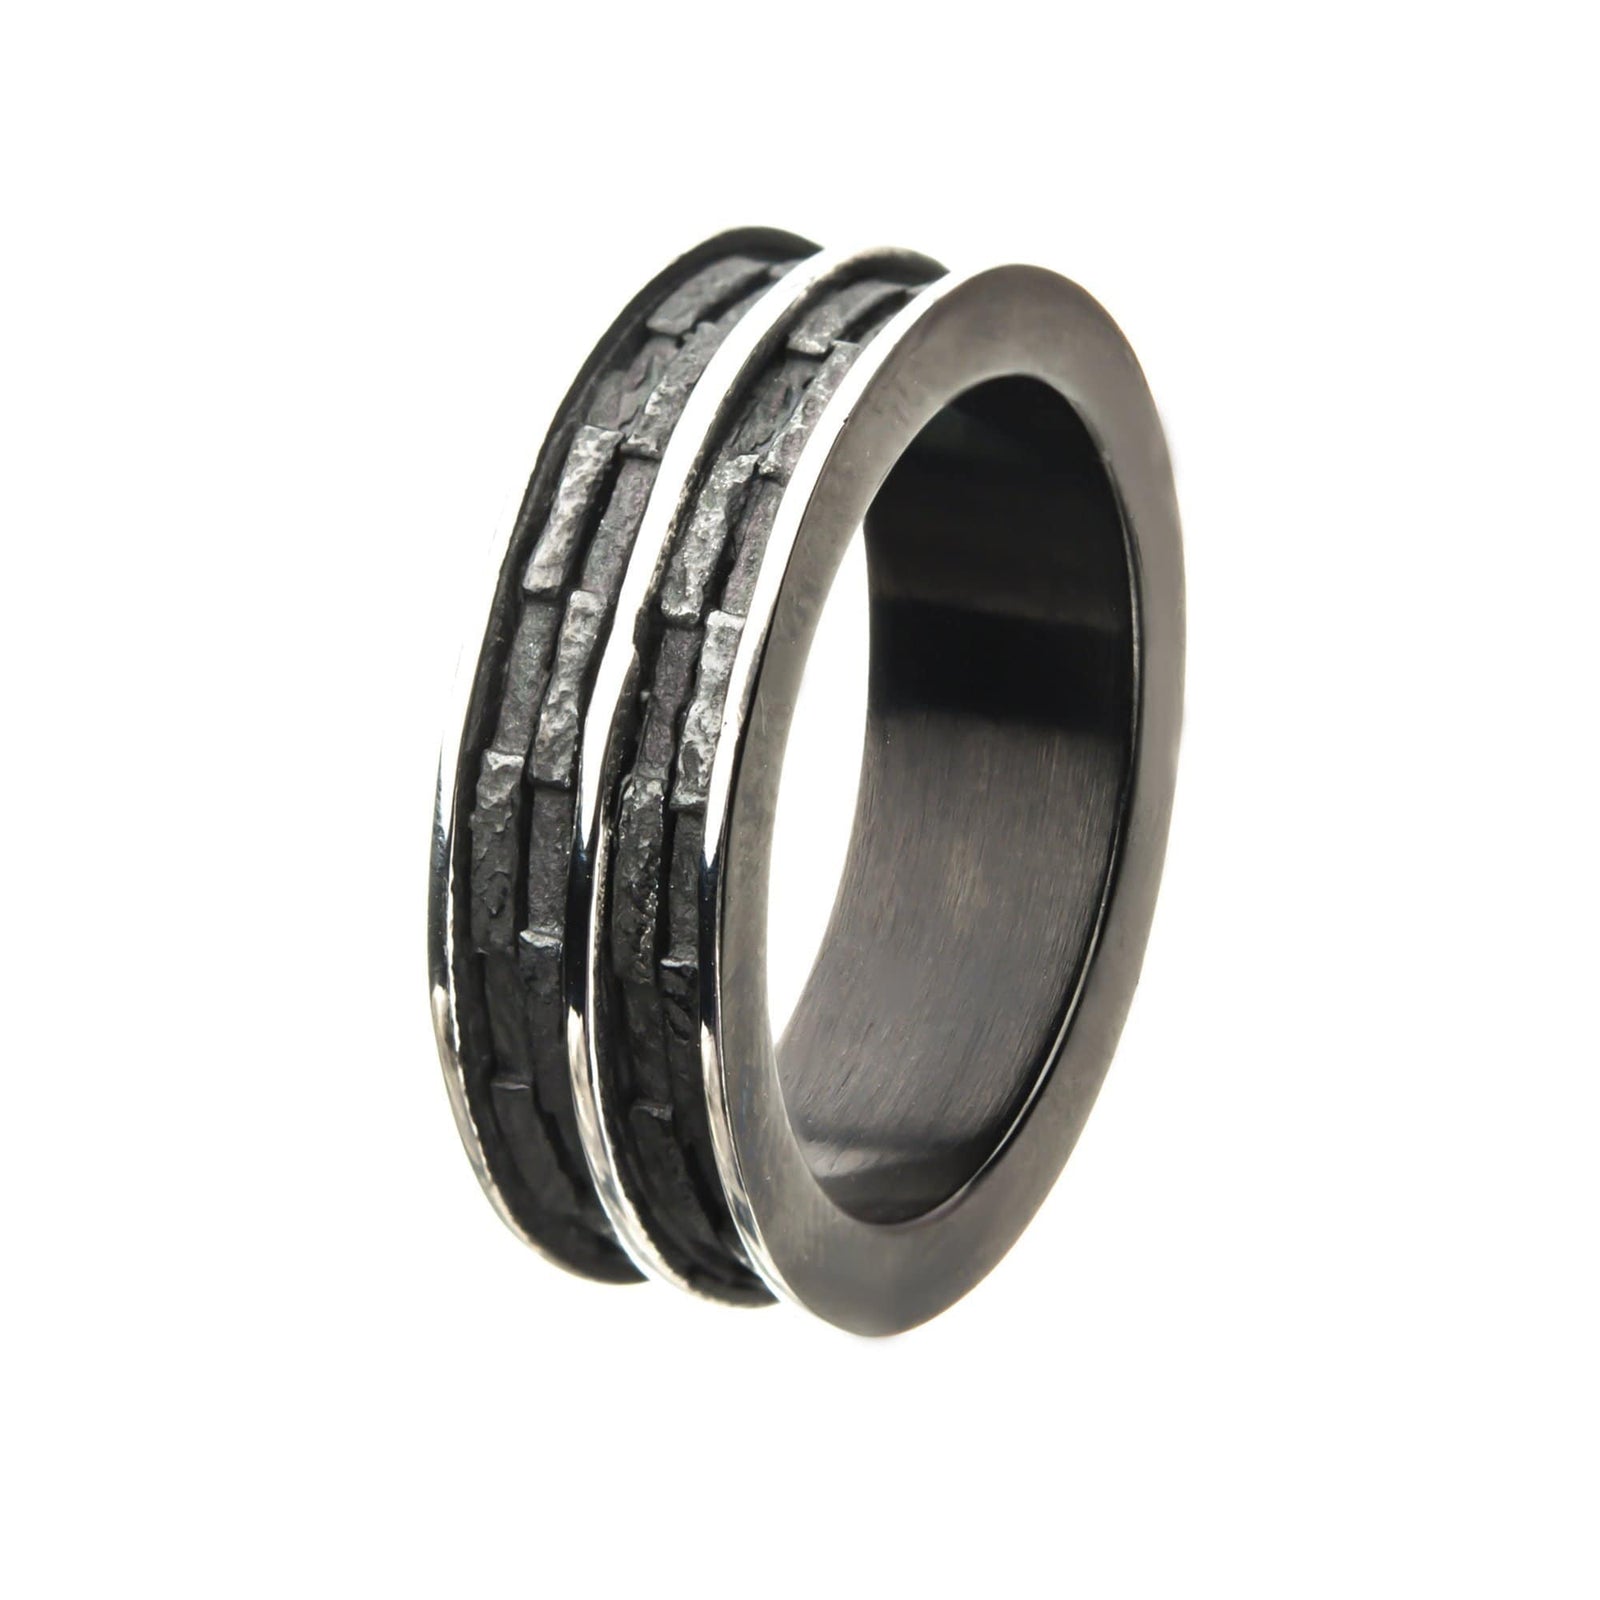 INOX JEWELRY Rings Black and Silver Tone Stainless Steel Antique Finish Rugged Band Ring